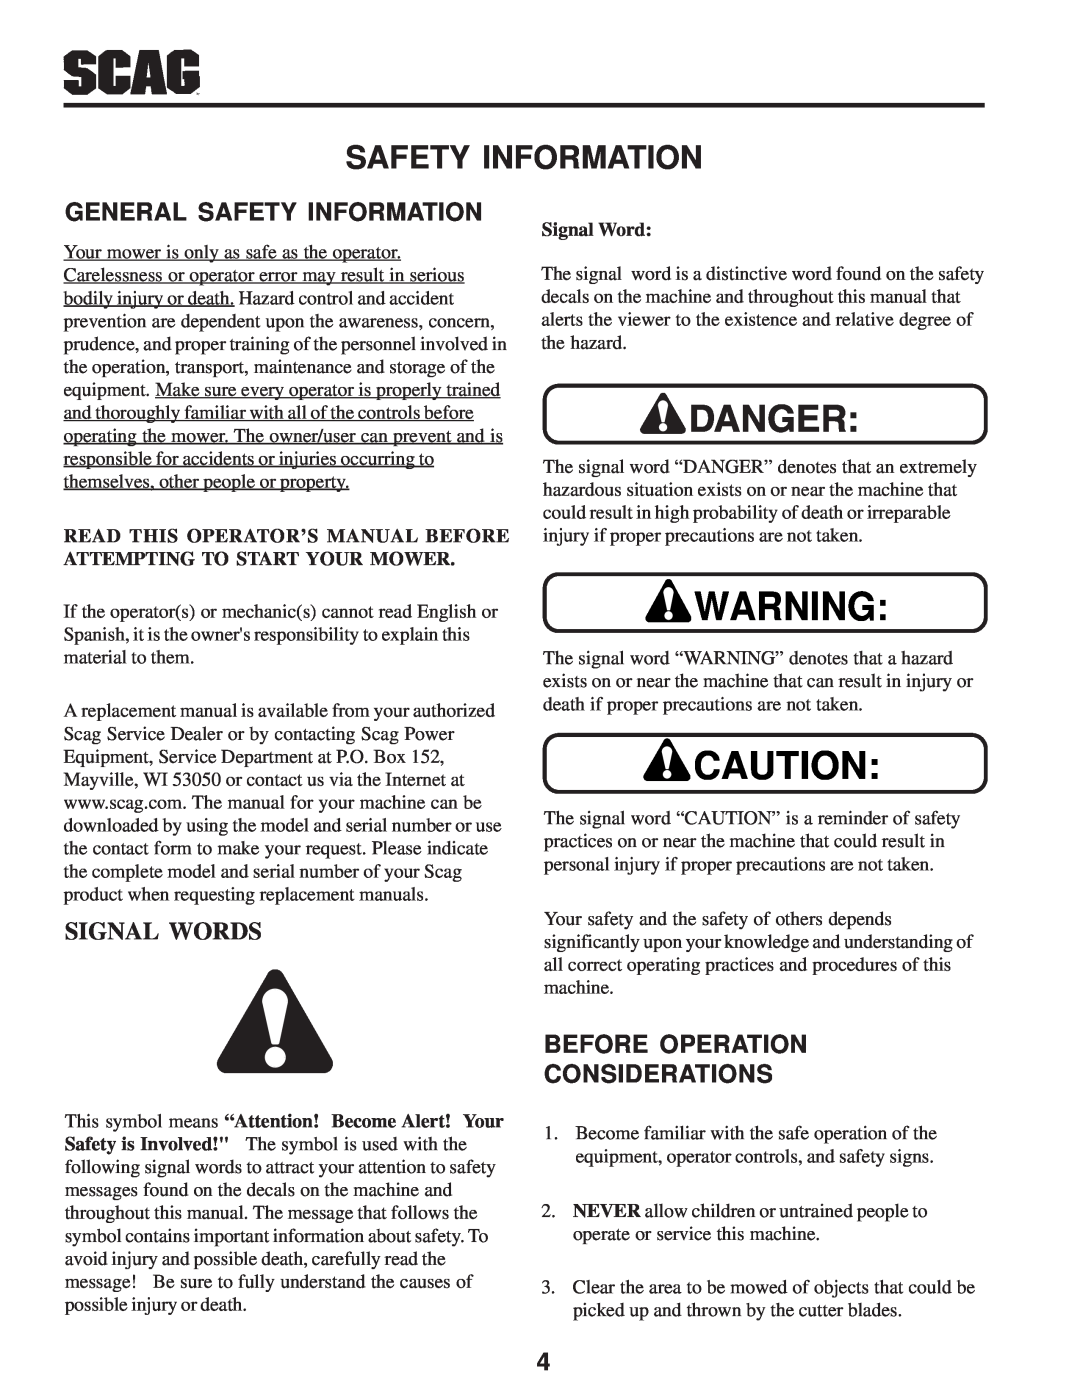 Scag Power Equipment SW manual Signal Words, General Safety Information, Before Operation Considerations 